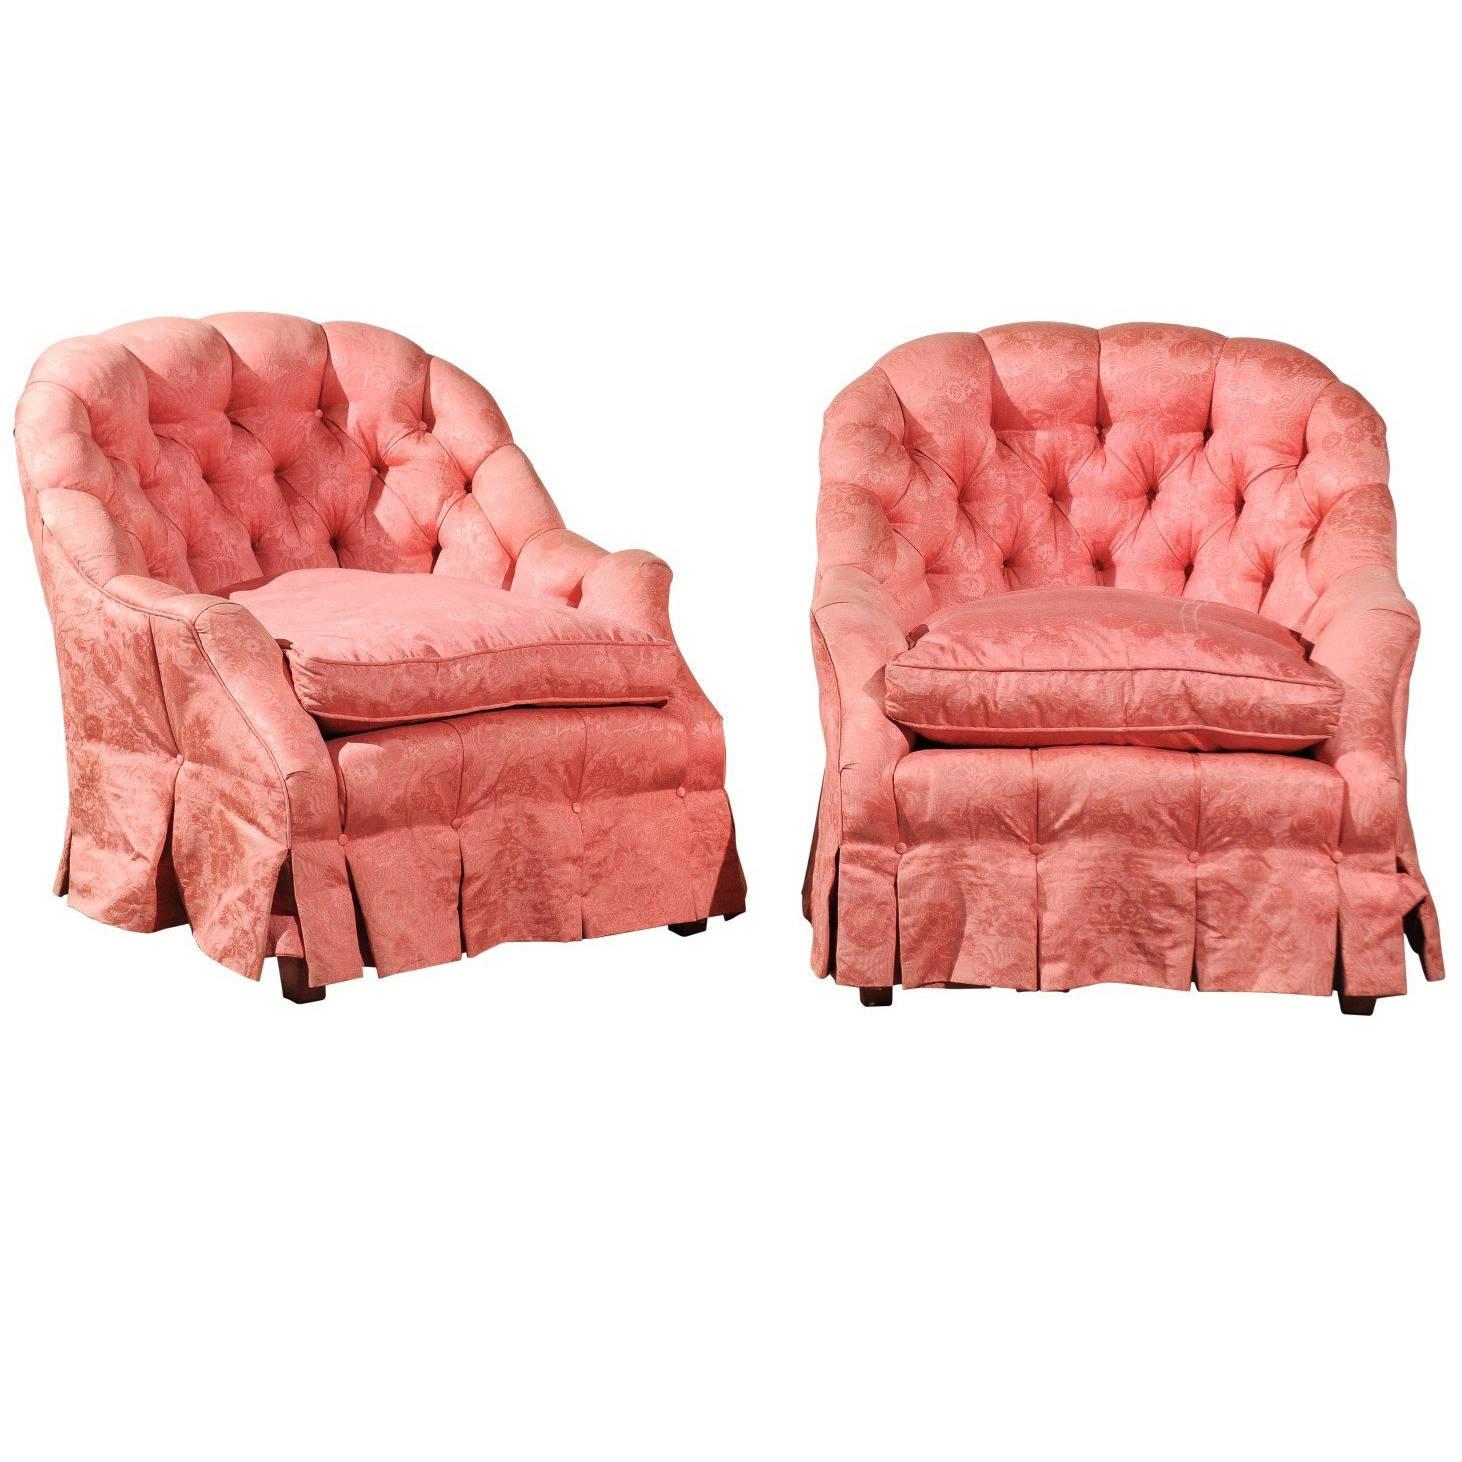 Pair of Tufted Club Chairs, circa 1960s-1970s